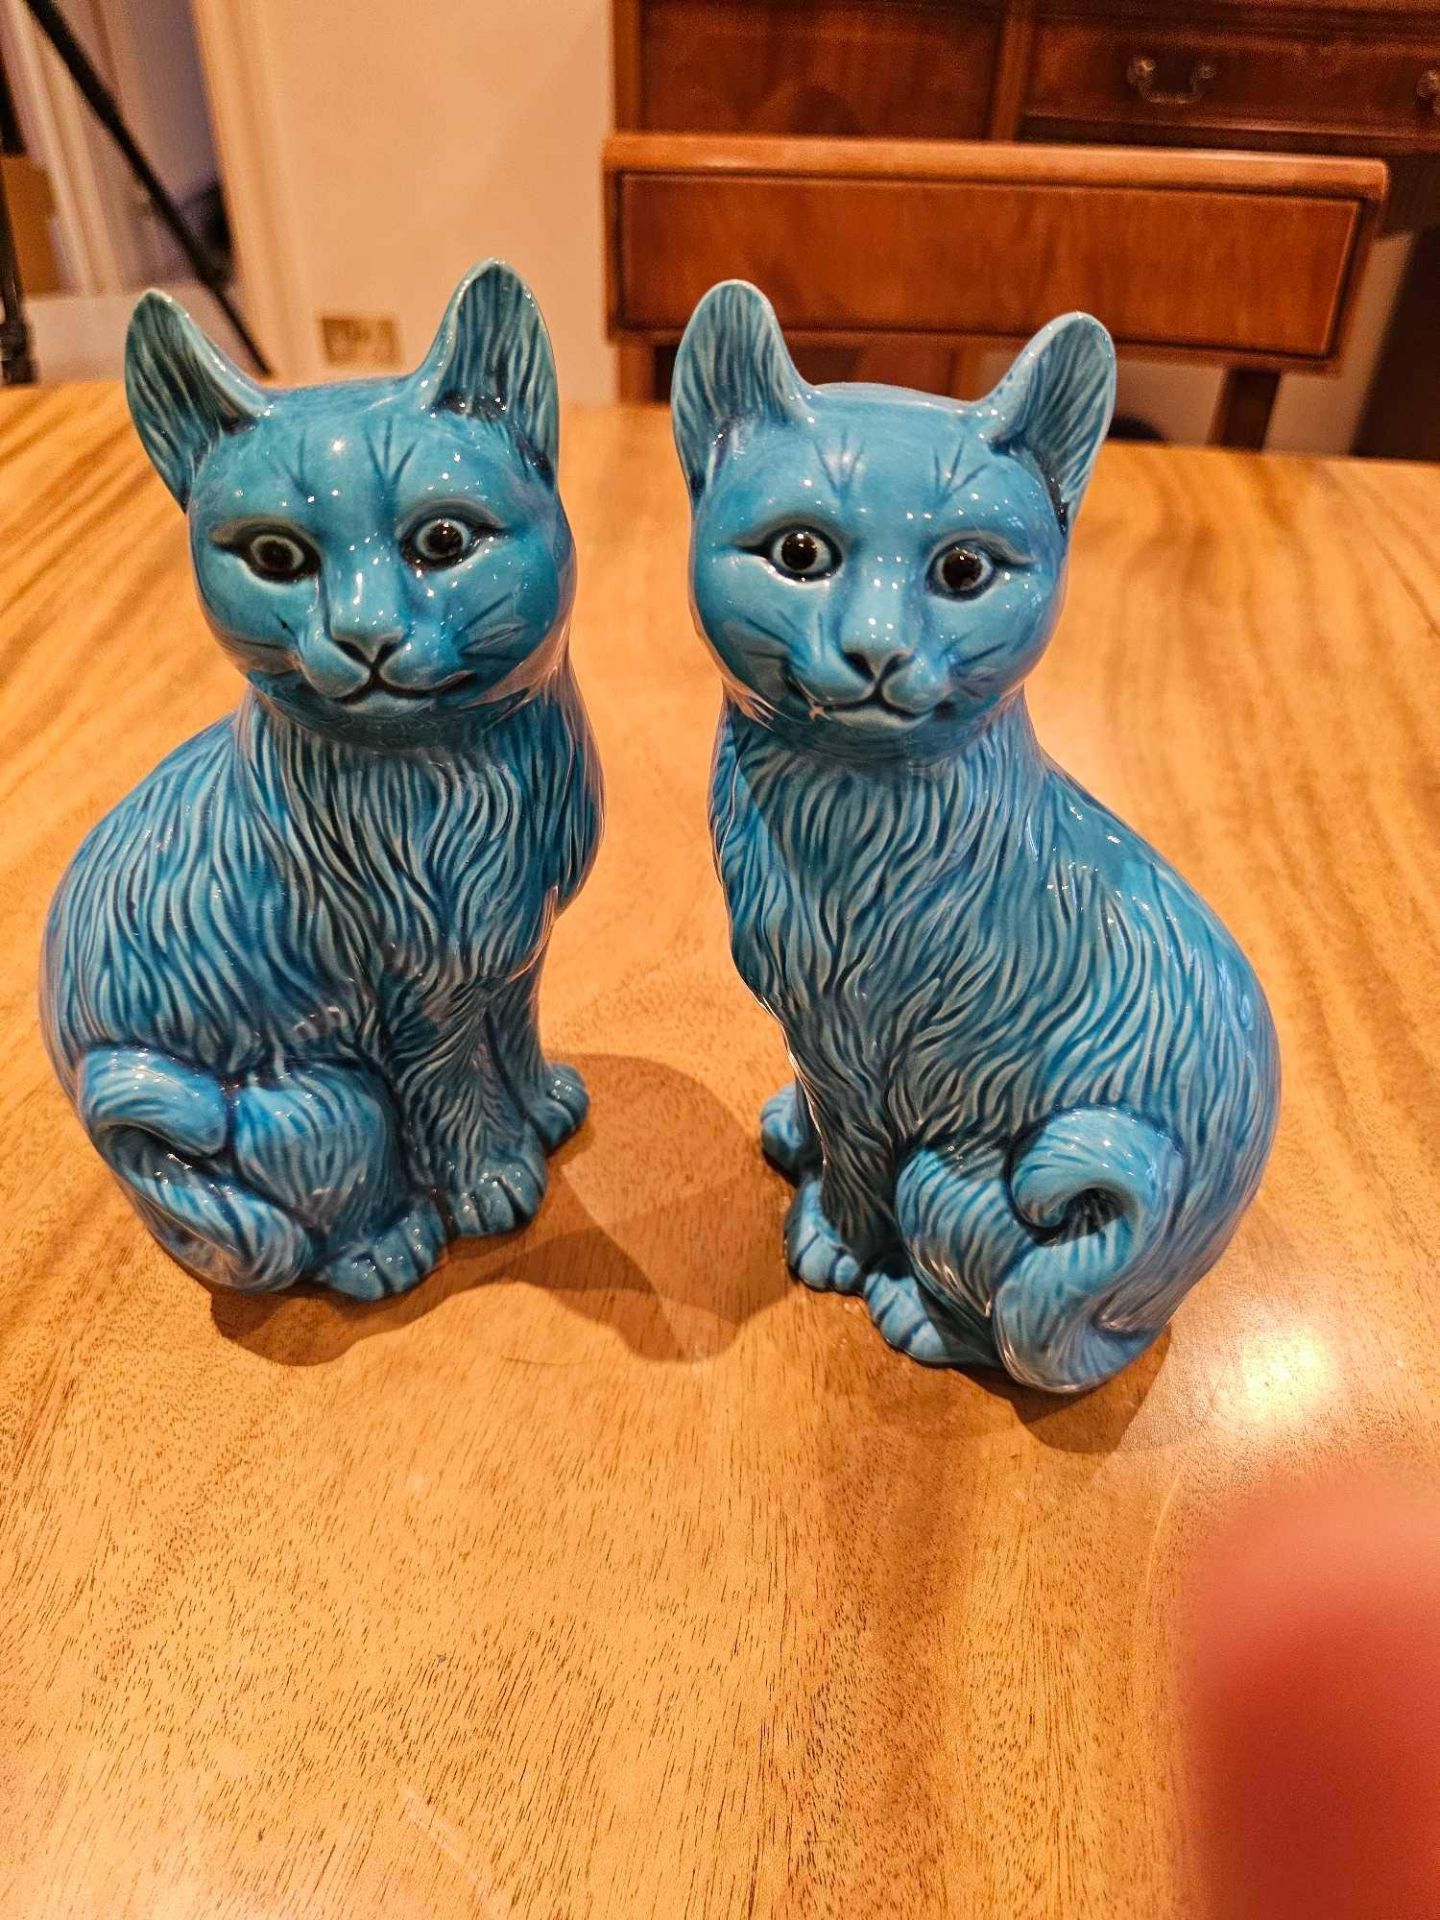 Turquoise Glazed Vintage Collectible Set Of 2 Cats - Faience Majolica Made In China - Image 3 of 3